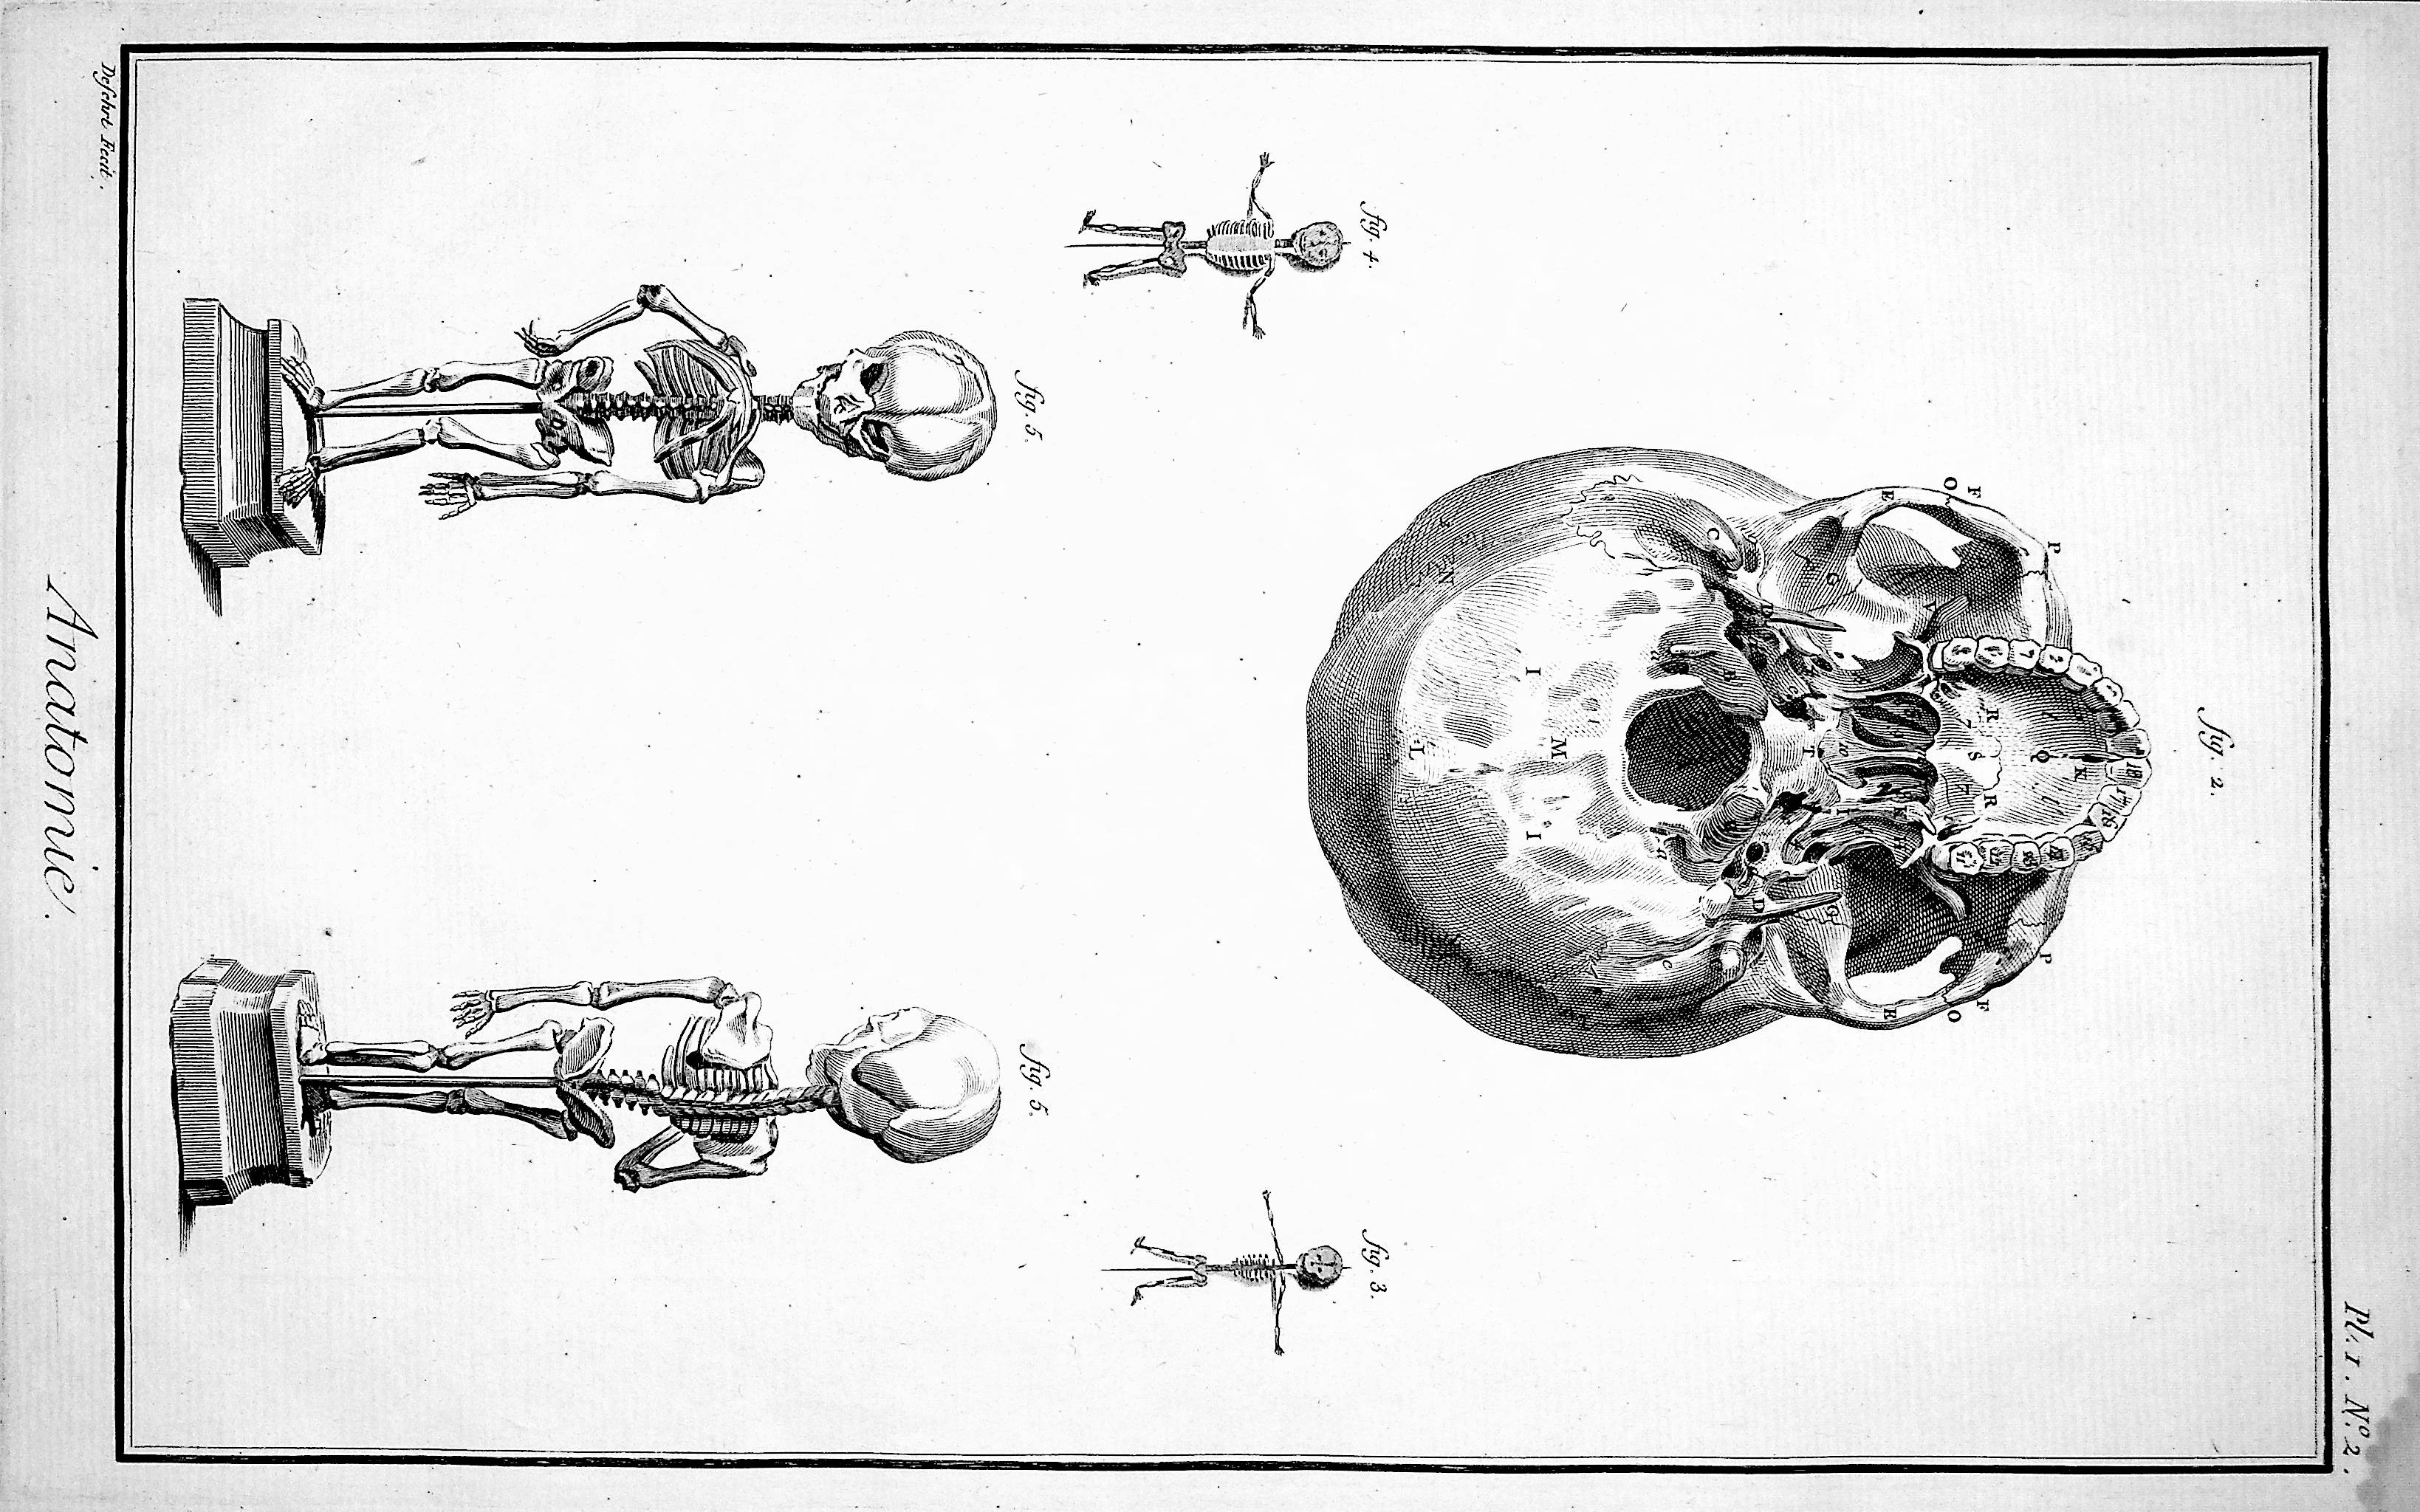 Image for Encyclopedie, Anatomie Plate I No 2. The head of the skeleton seen from below with several fetuses